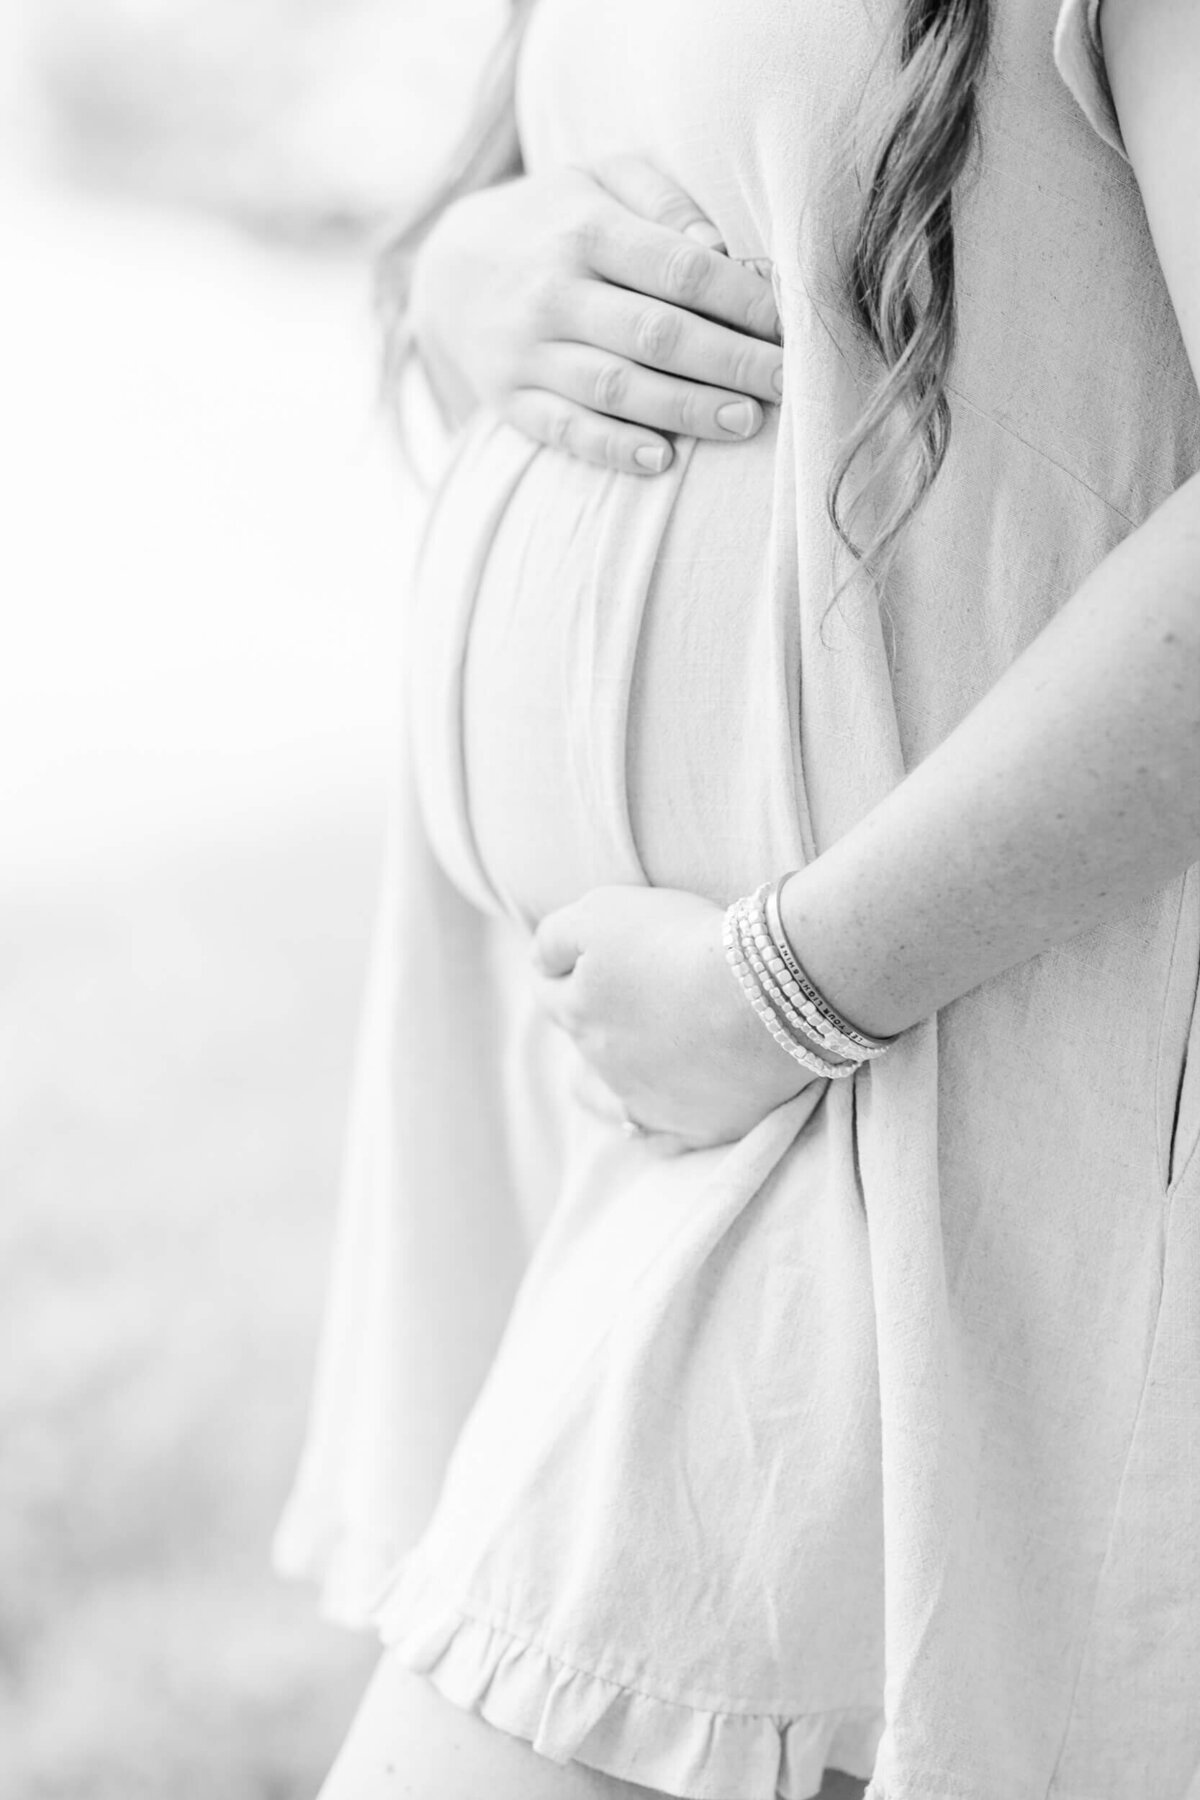 Black and white, close up of a woman cradling her baby bump with a bracelet that says "let your light shine"